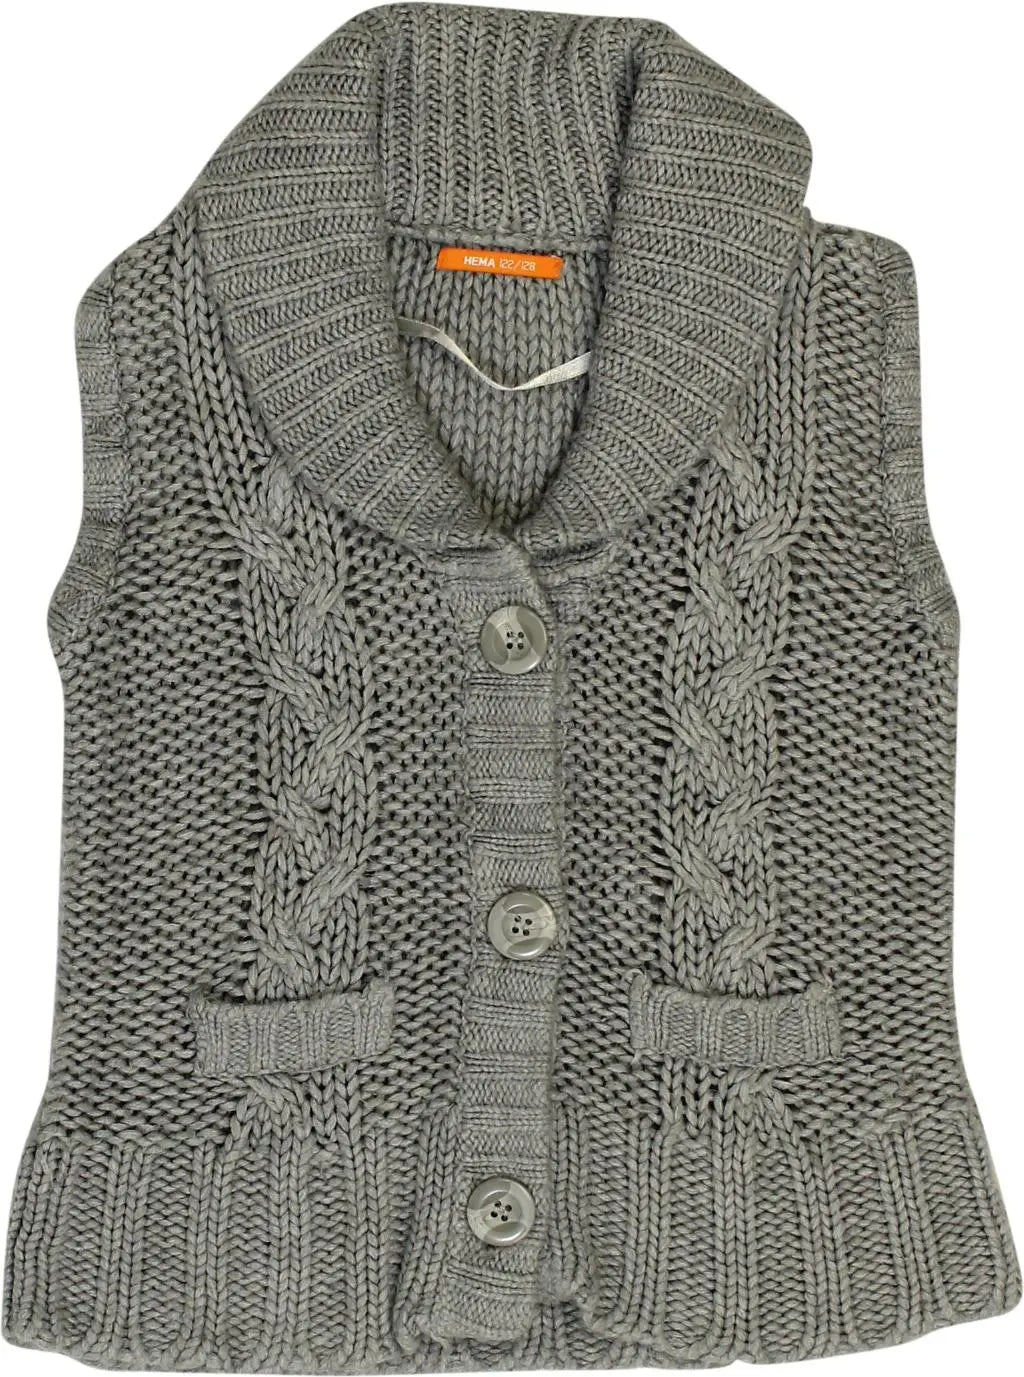 HEMA - Grey Knitted Sleeveless Cardigan- ThriftTale.com - Vintage and second handclothing